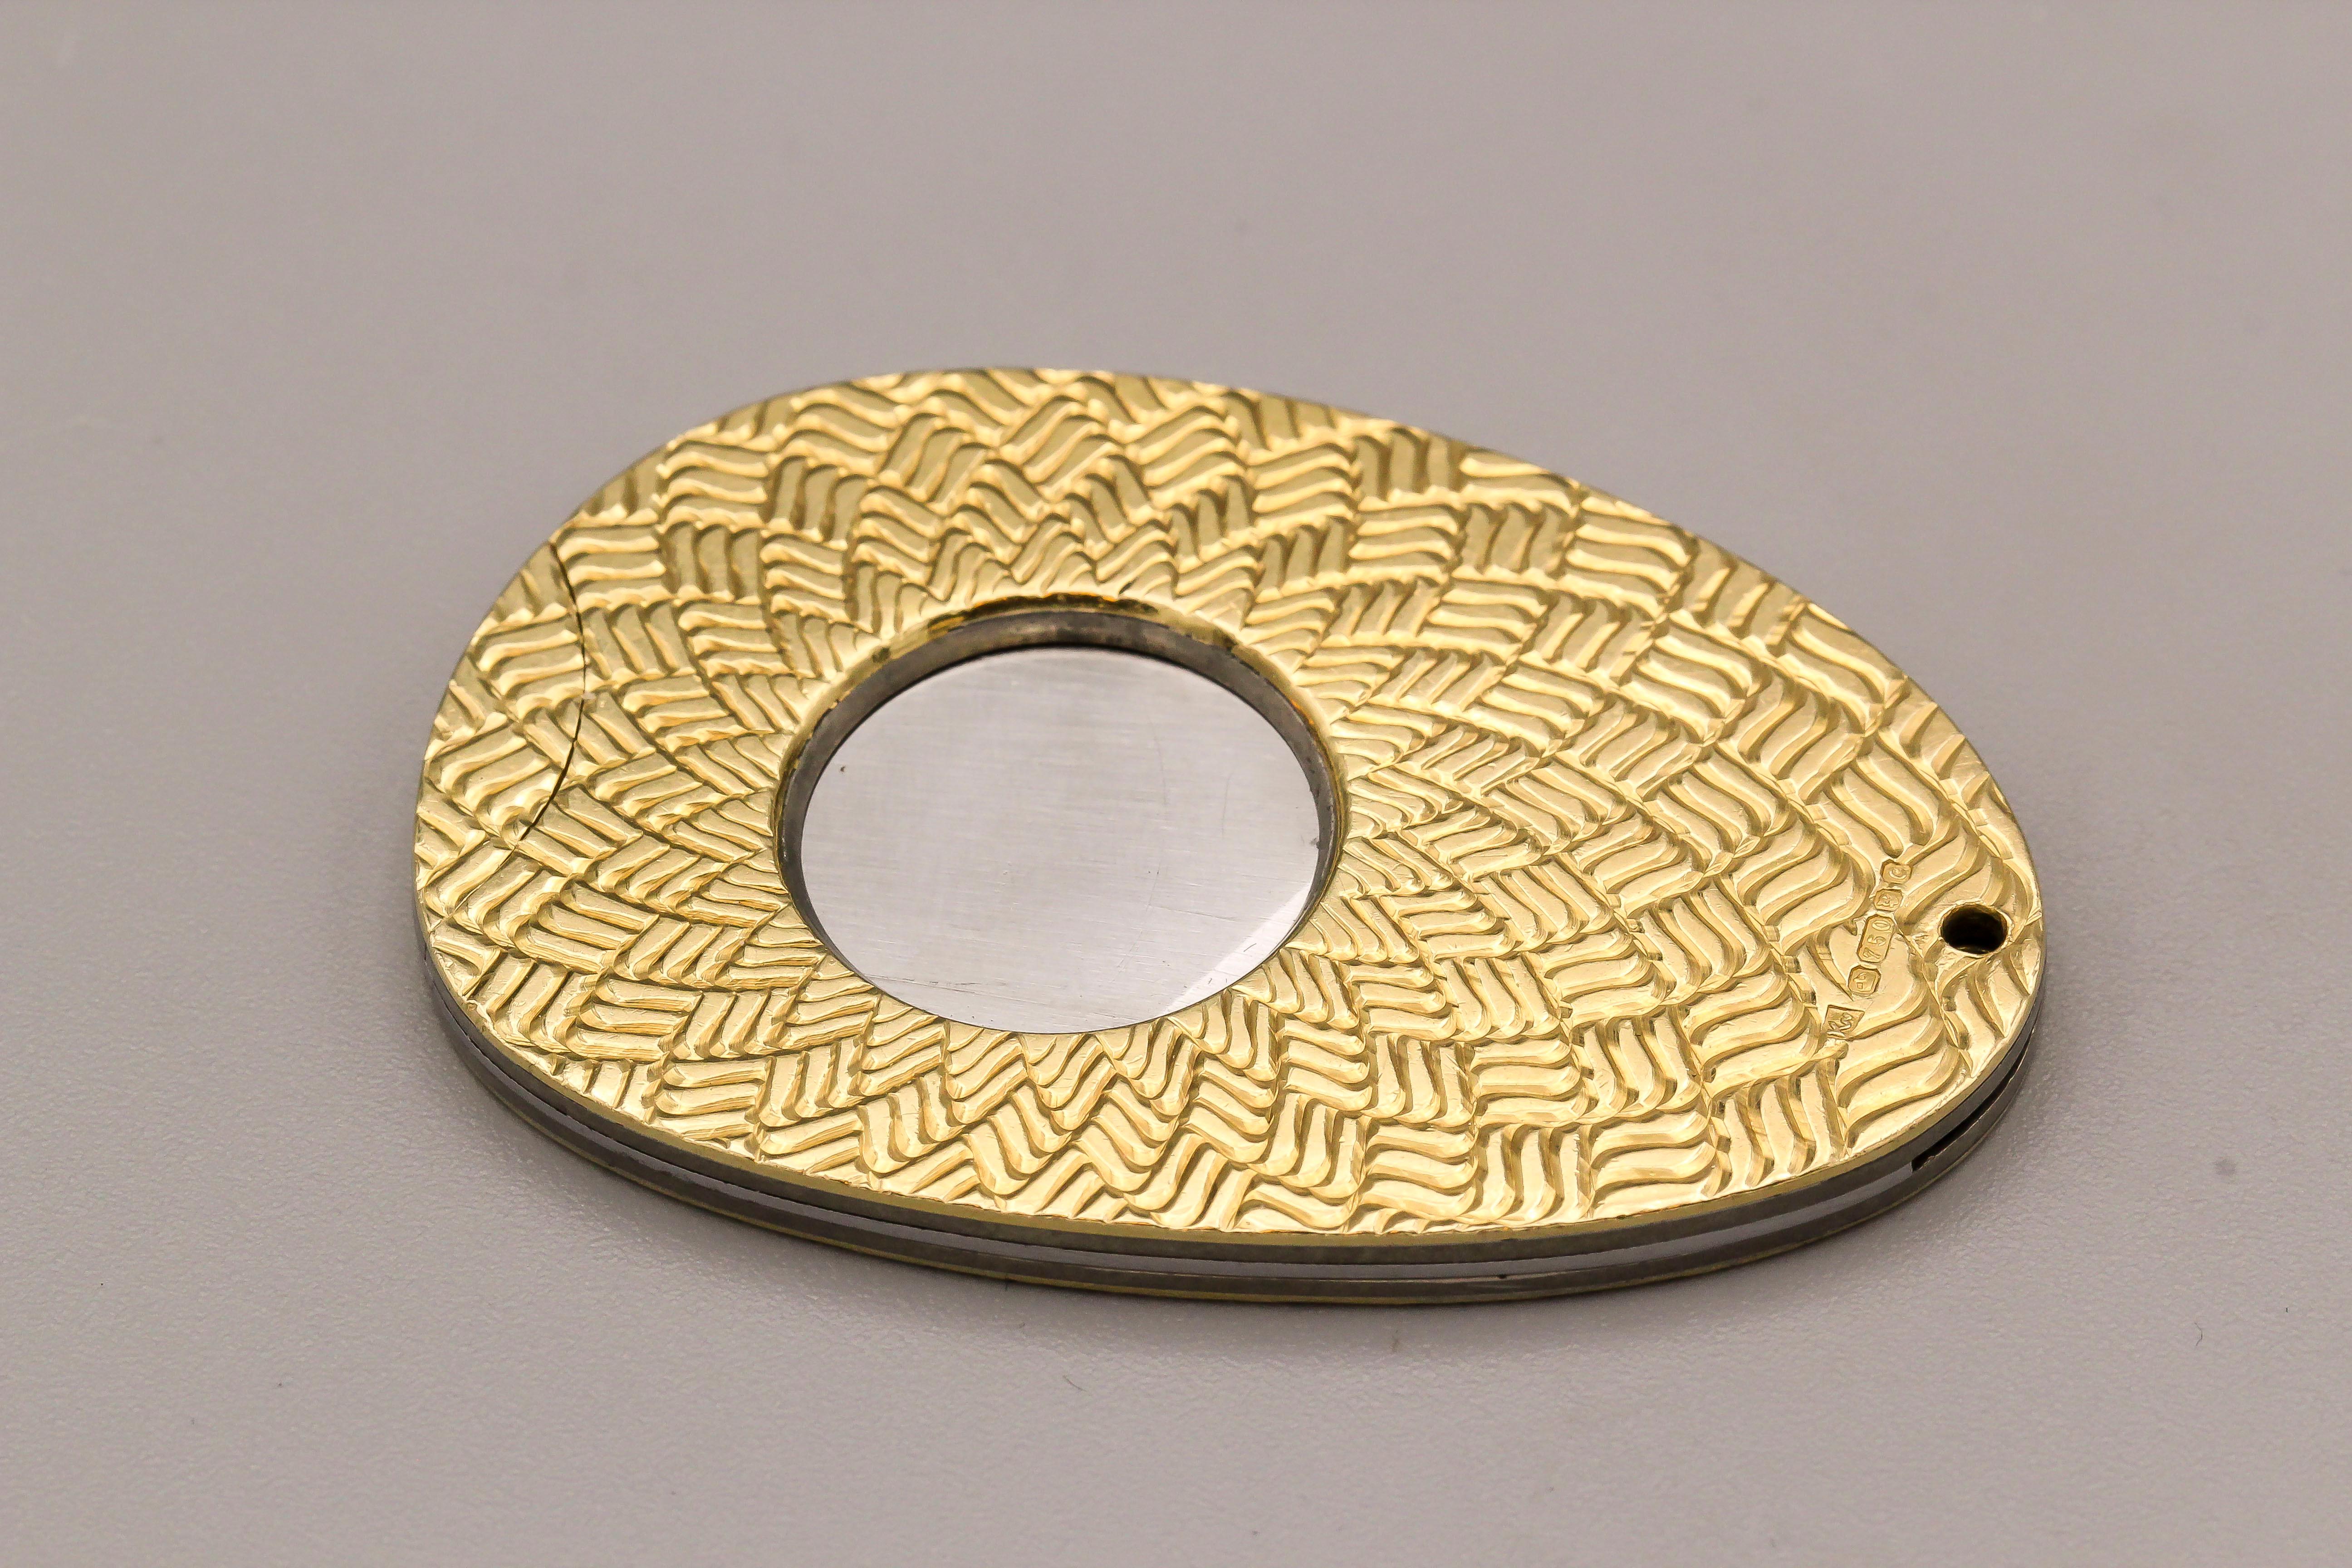 Fine 18k gold cigar cutter, circa 1970s. It features a basket weave design, a stainless steel blade, and the opening is 5/8